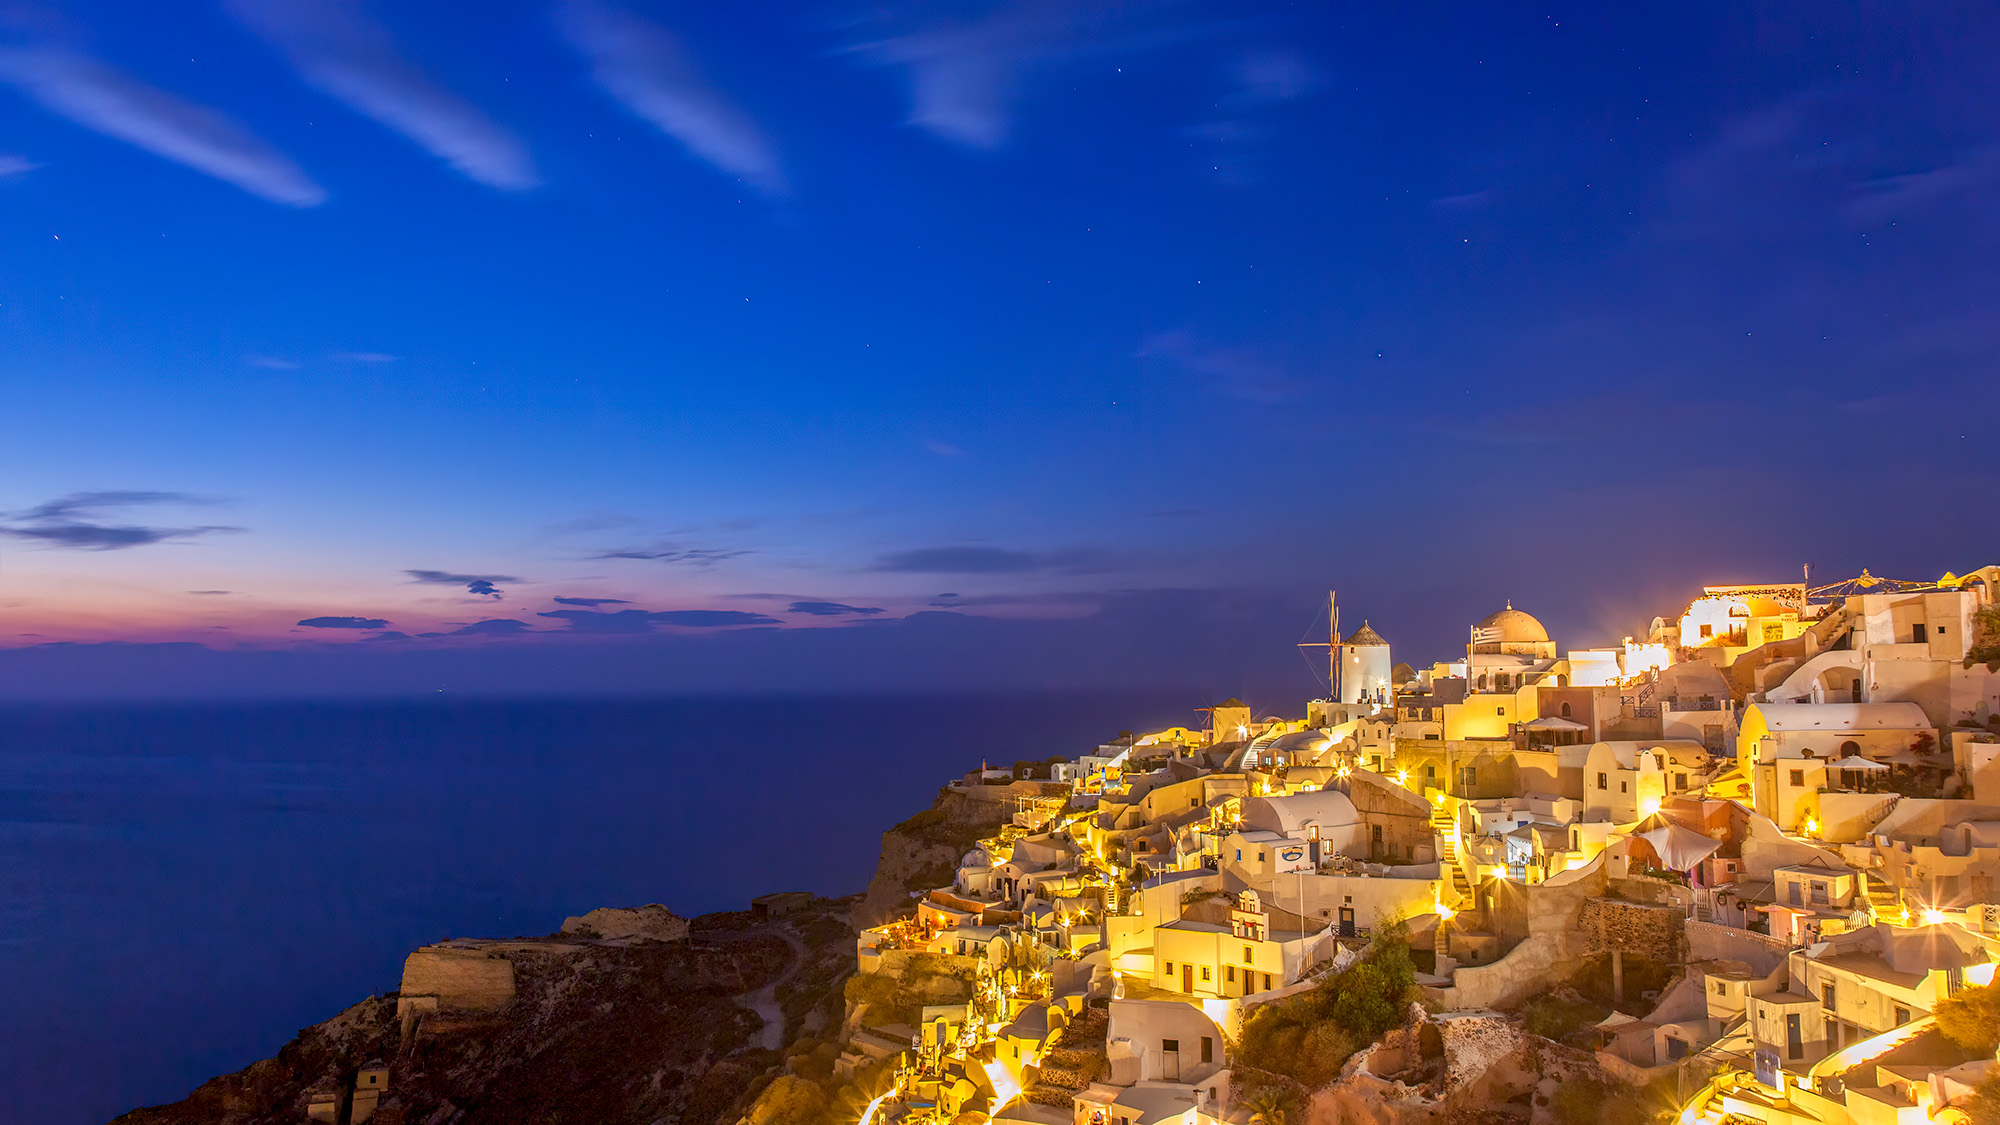 Captured during the late blue hour, this image offers a sweeping panorama of Oia, Santorini, Greece. On the left, the charming...